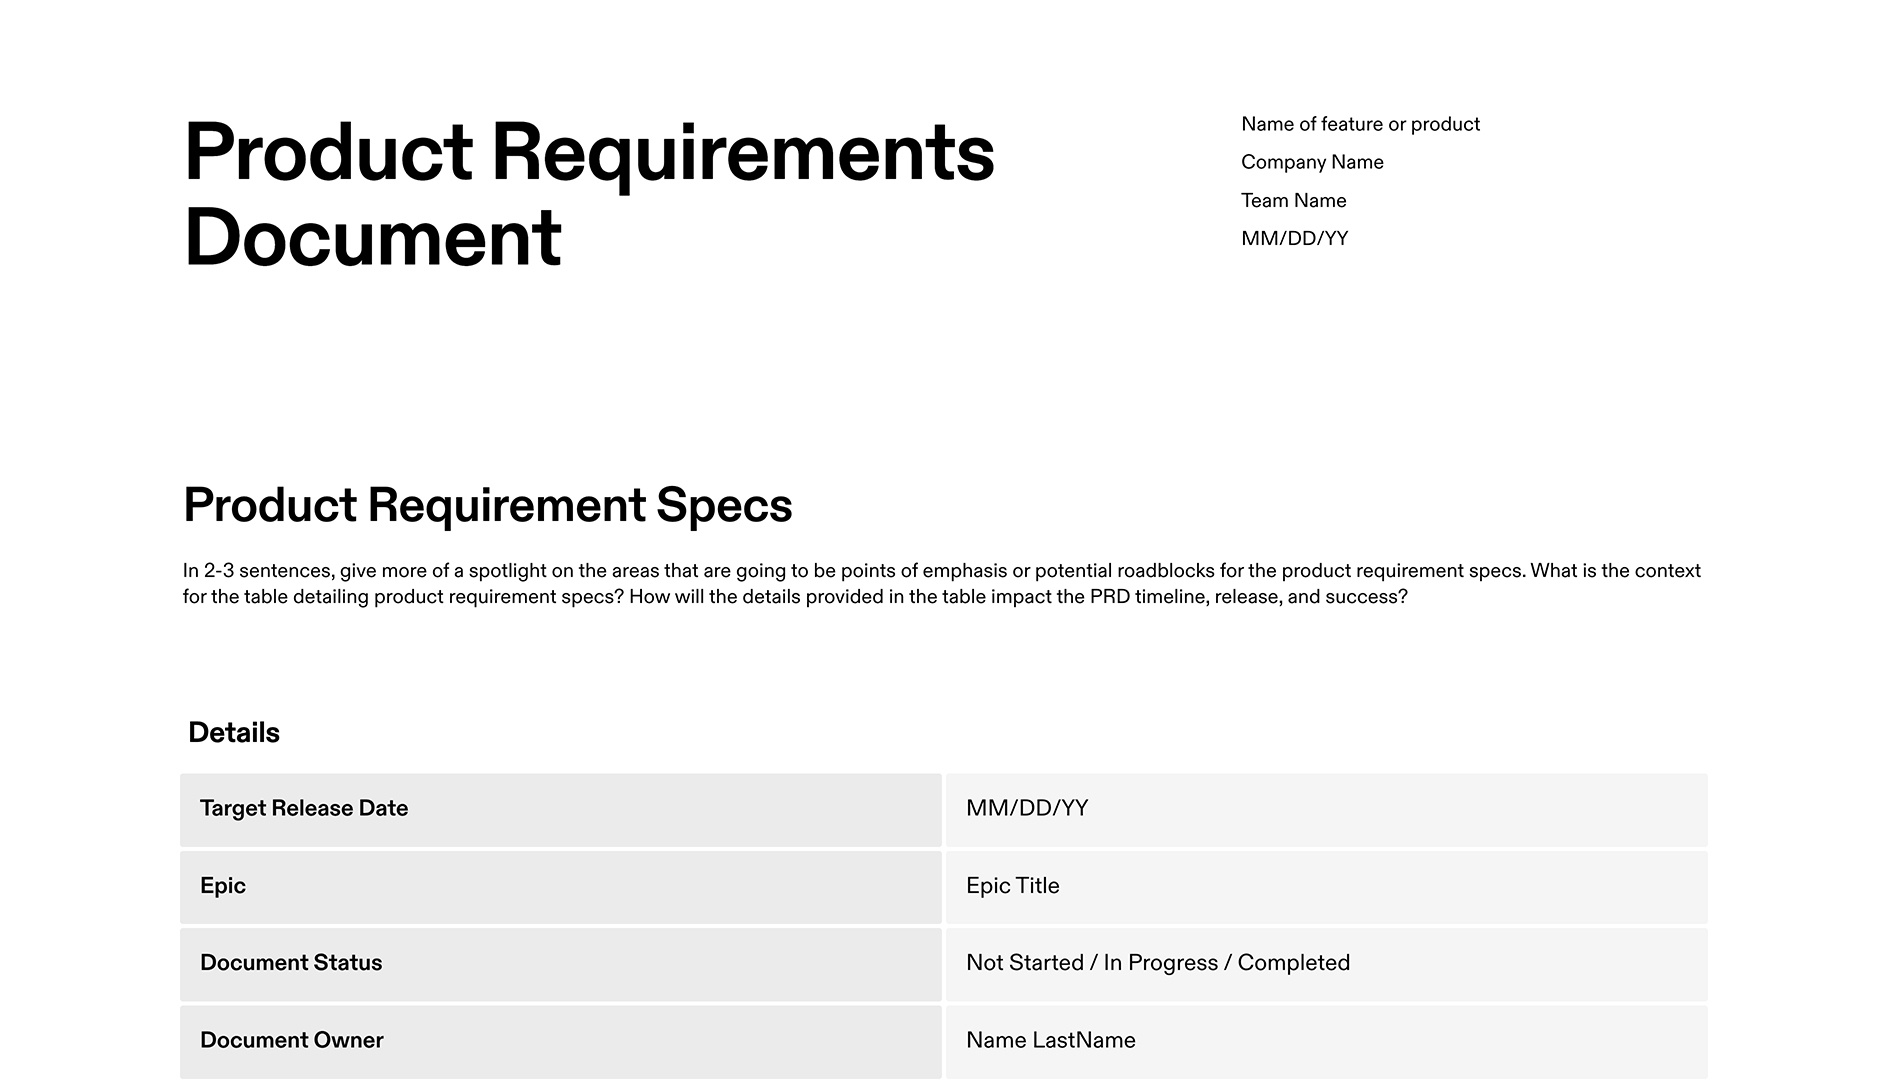 Product Requirements Document Template - Title